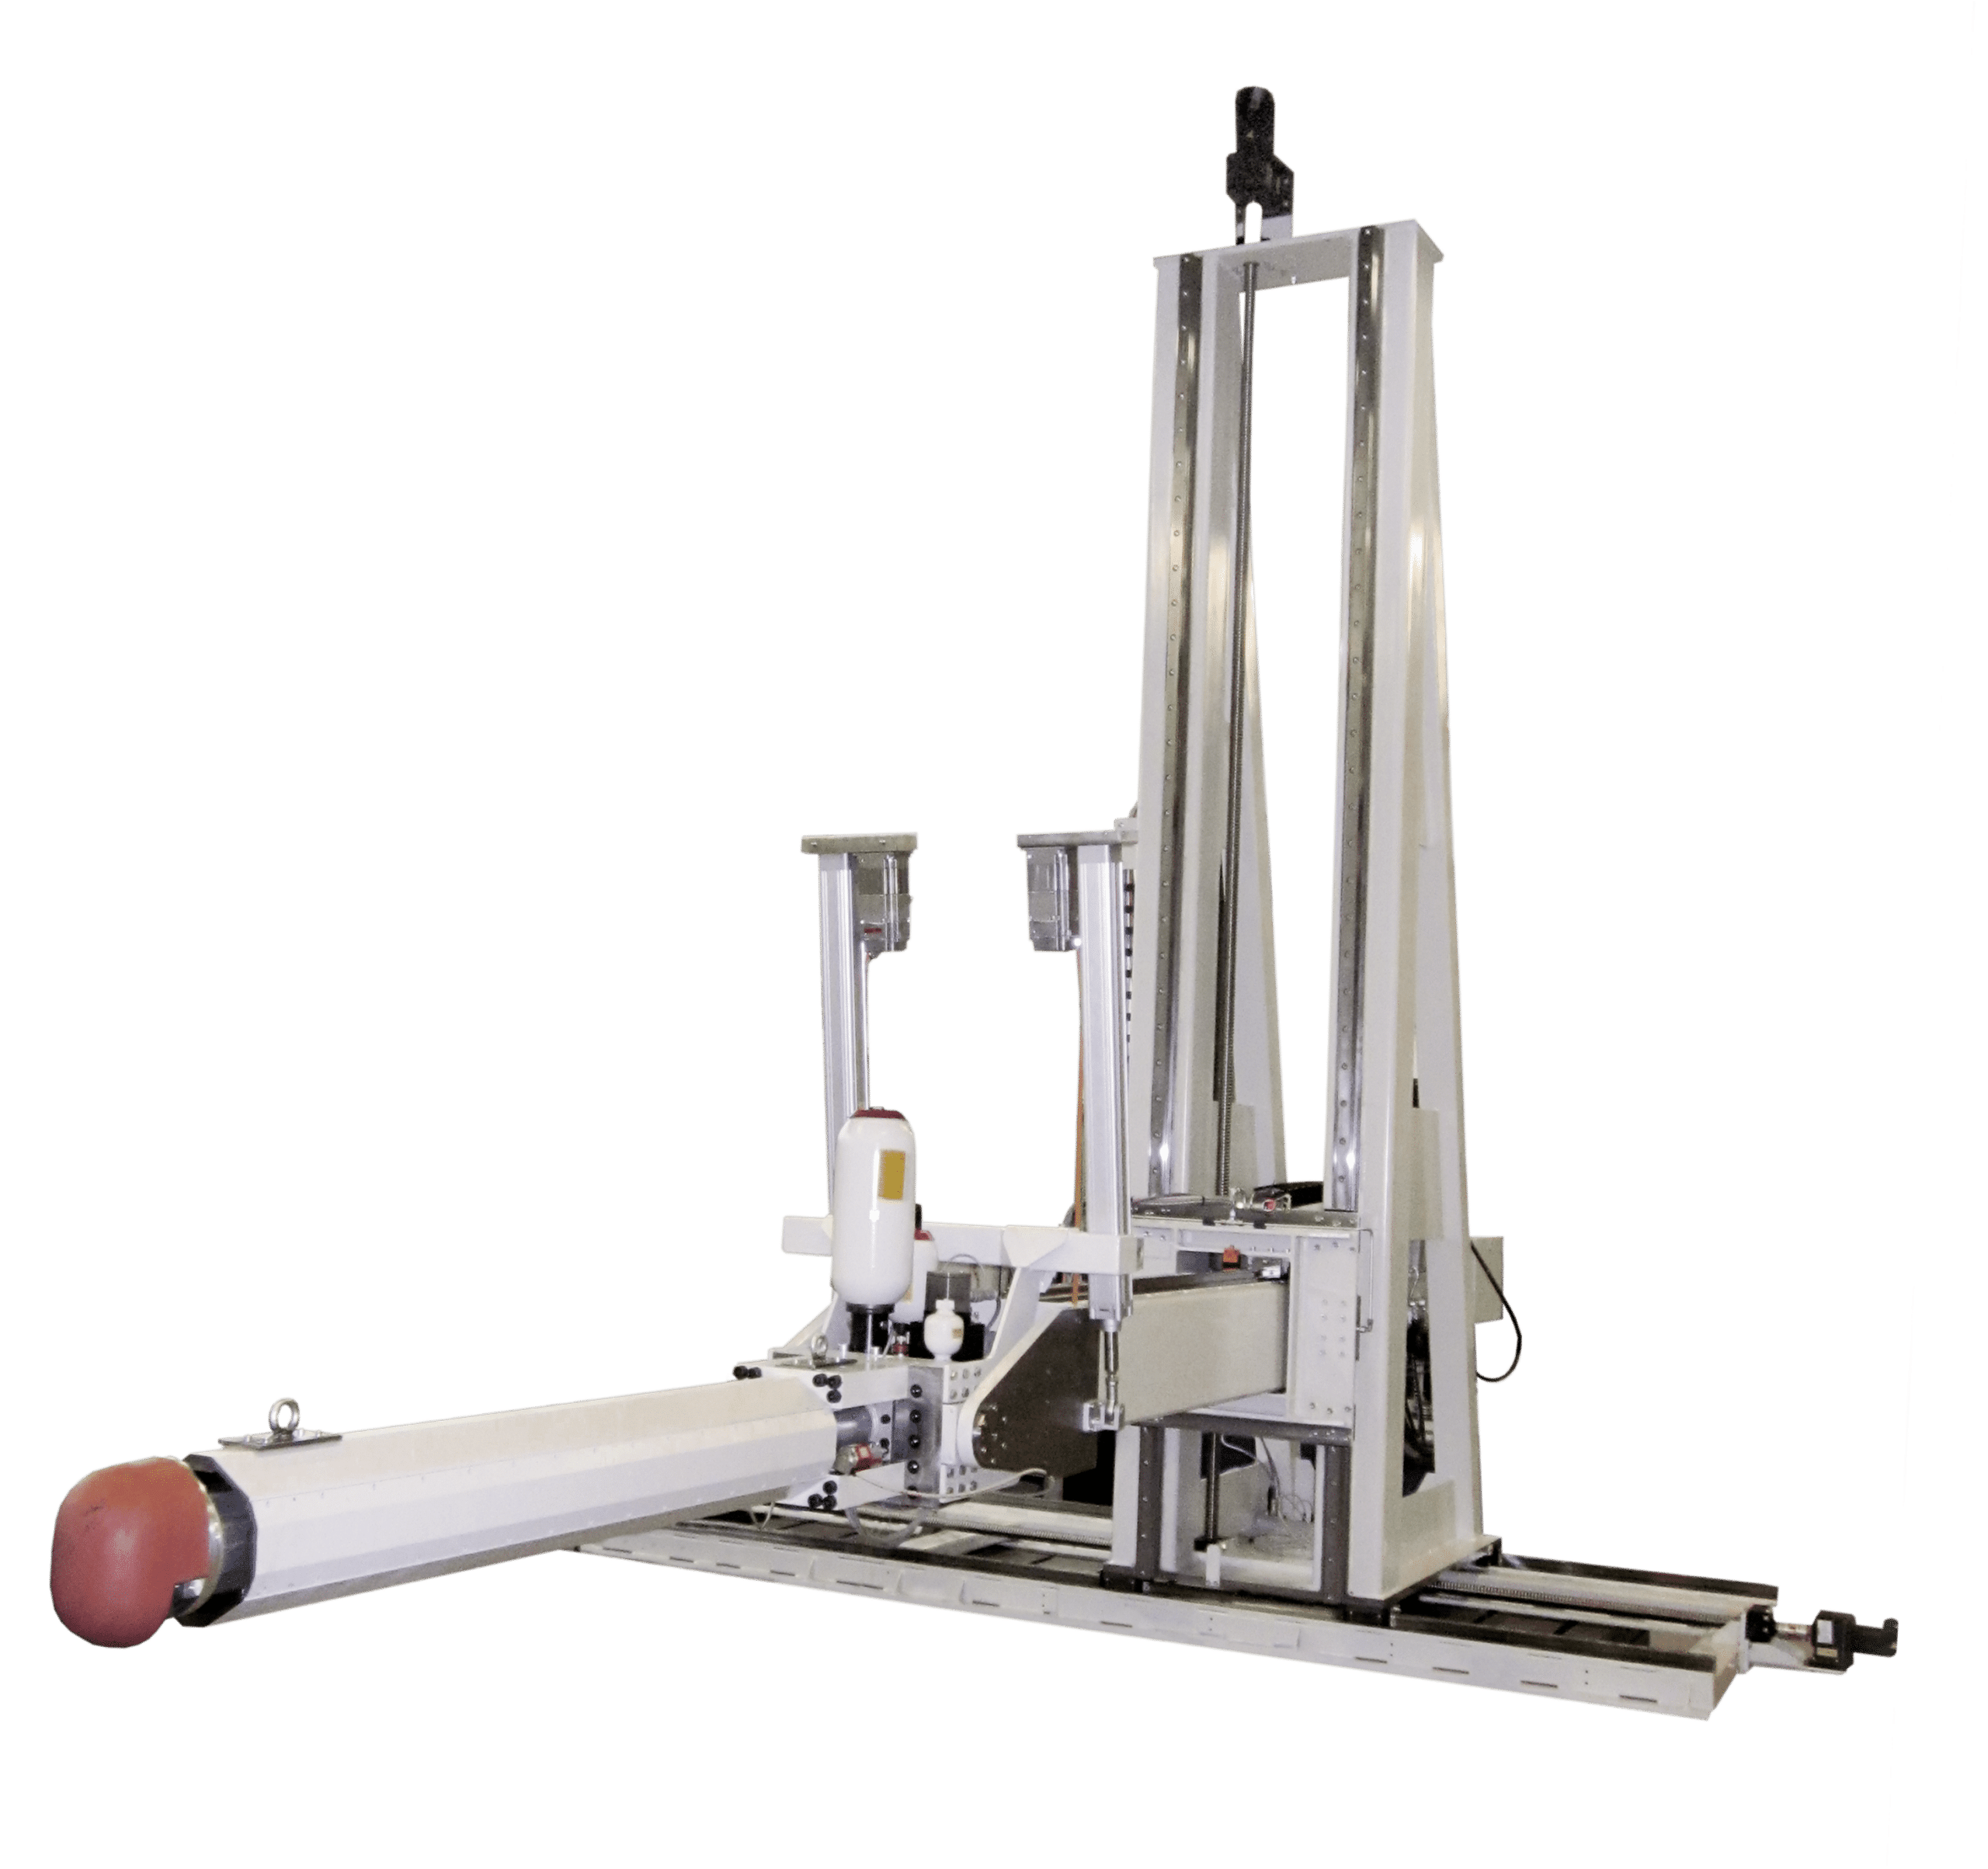 Oilgear Positioning System With Ejection Mitigation Module - Oilgear